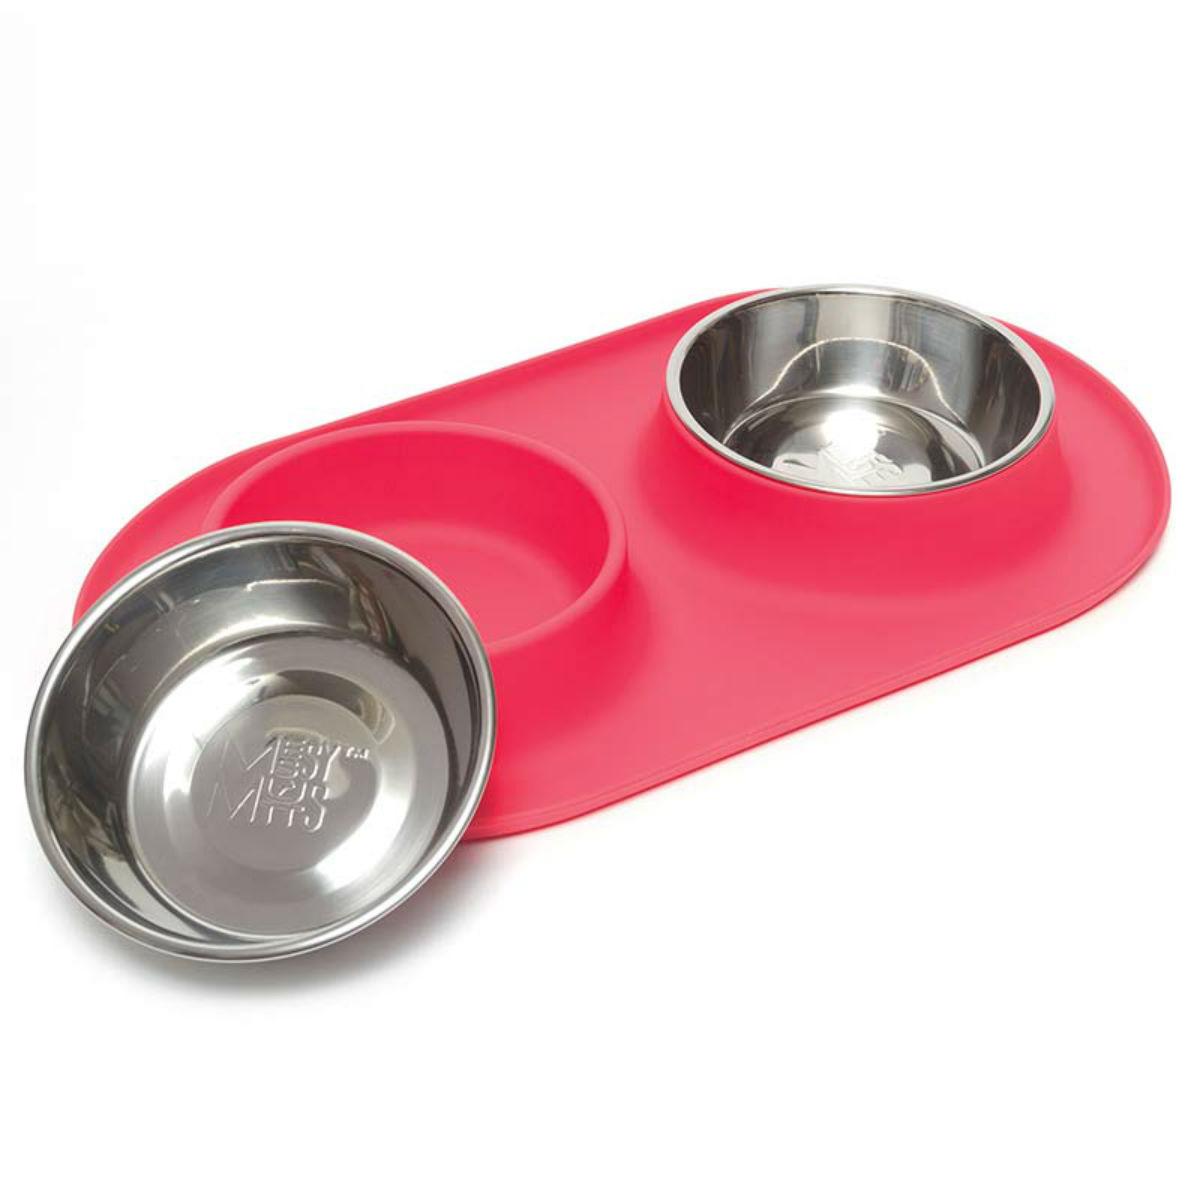 Messy Mutts Double Bowl Silicone Dog Feeder - Red